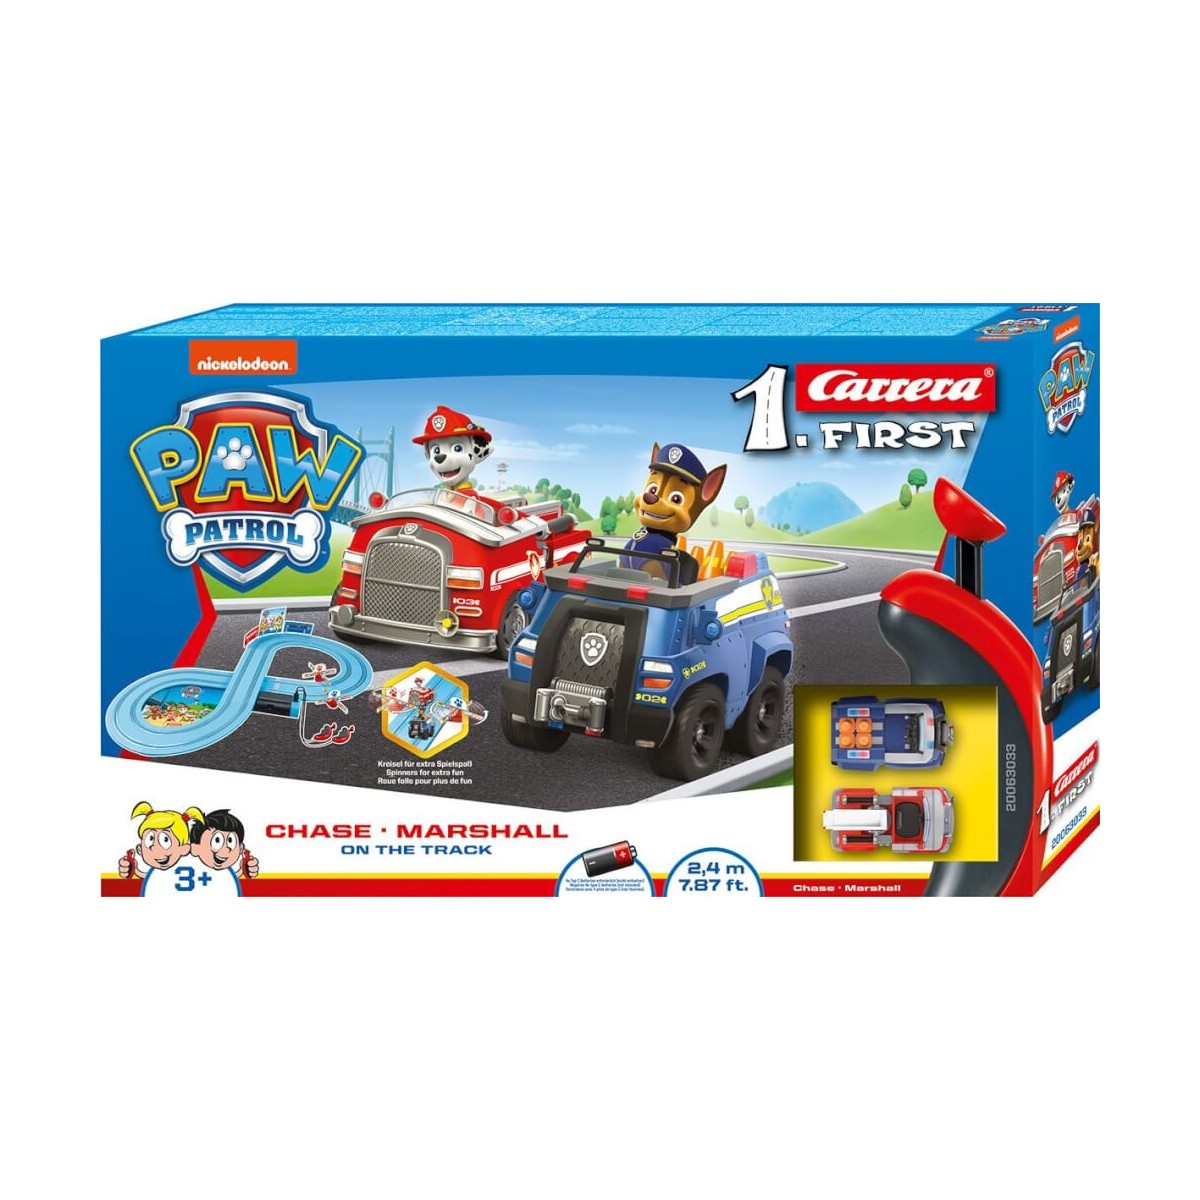 CARRERA FIRST   PAW PATROL   On the Track